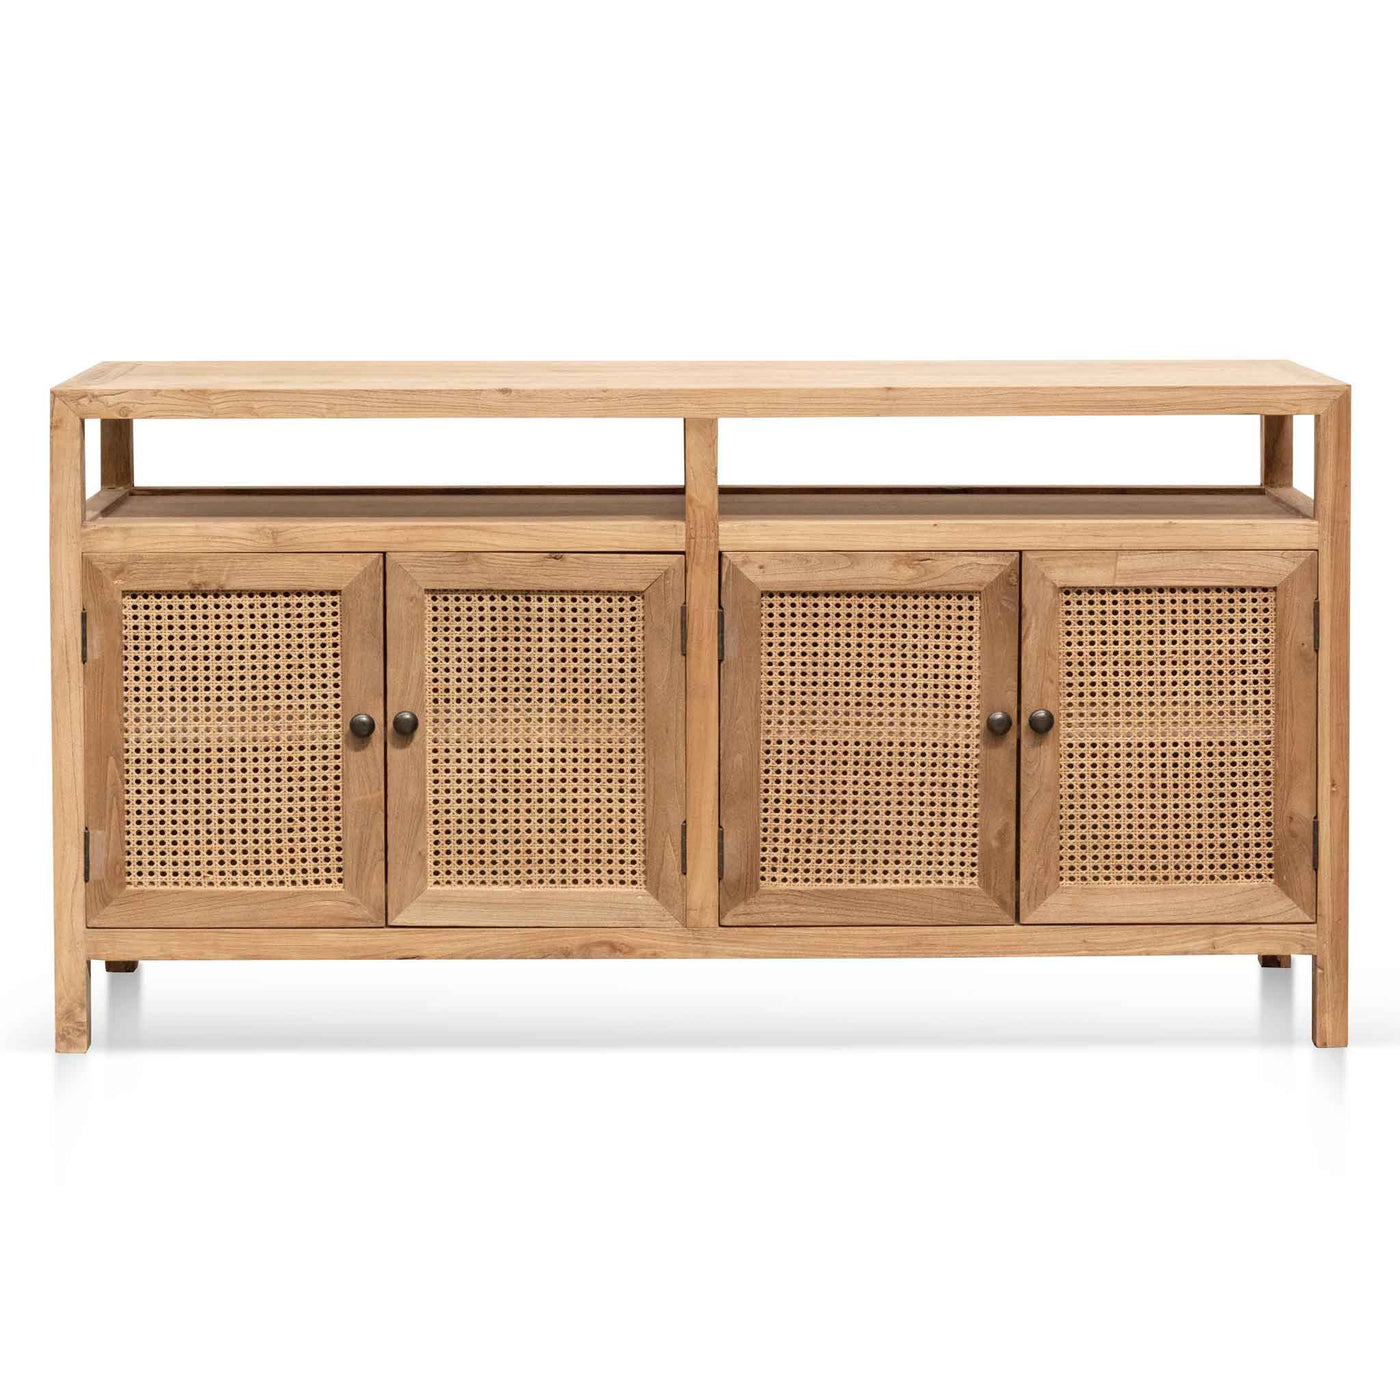 1.6m Sideboard Unit - Natural with Rattan Doors